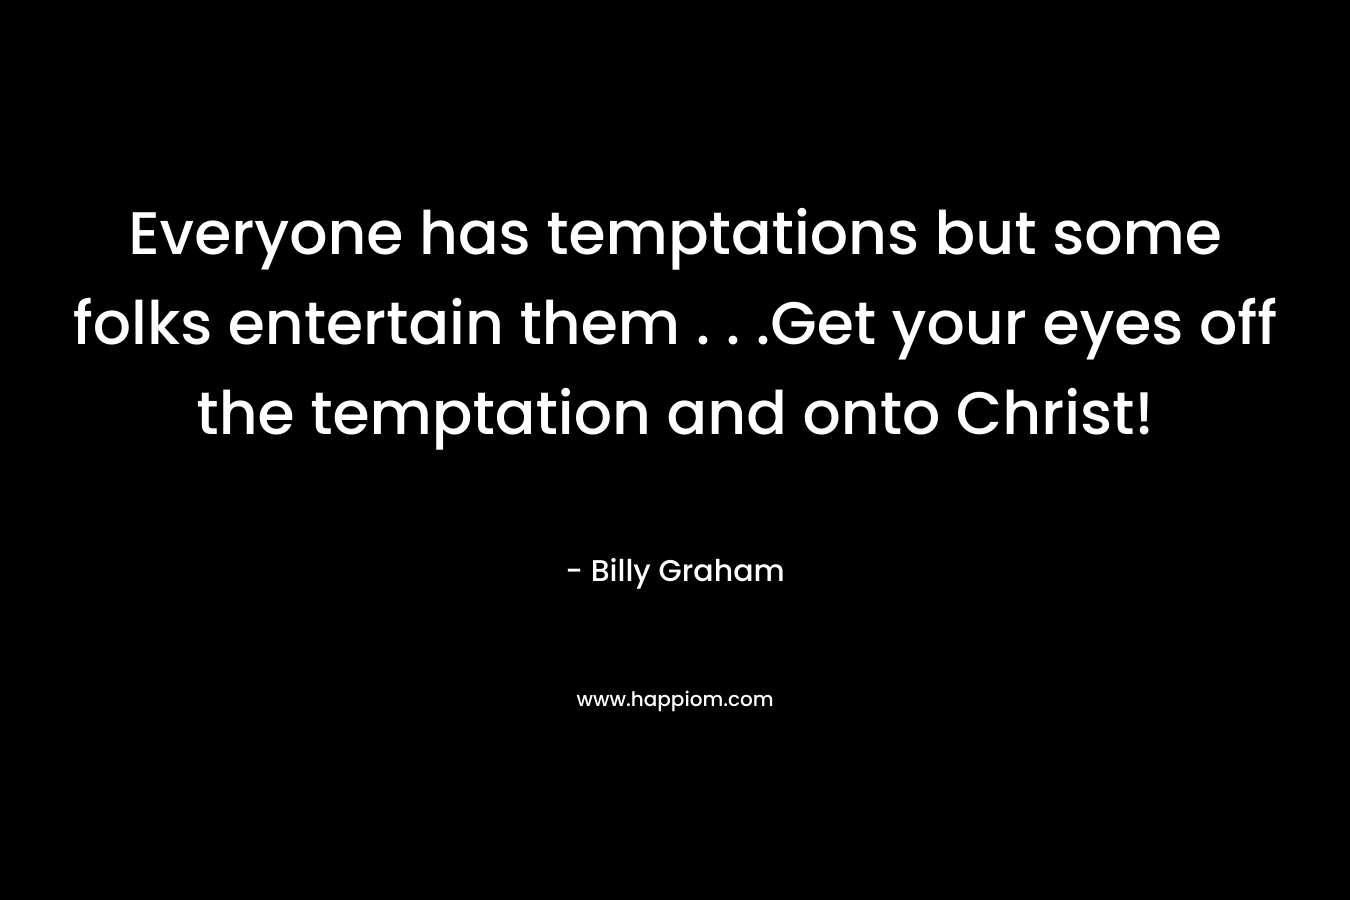 Everyone has temptations but some folks entertain them . . .Get your eyes off the temptation and onto Christ!